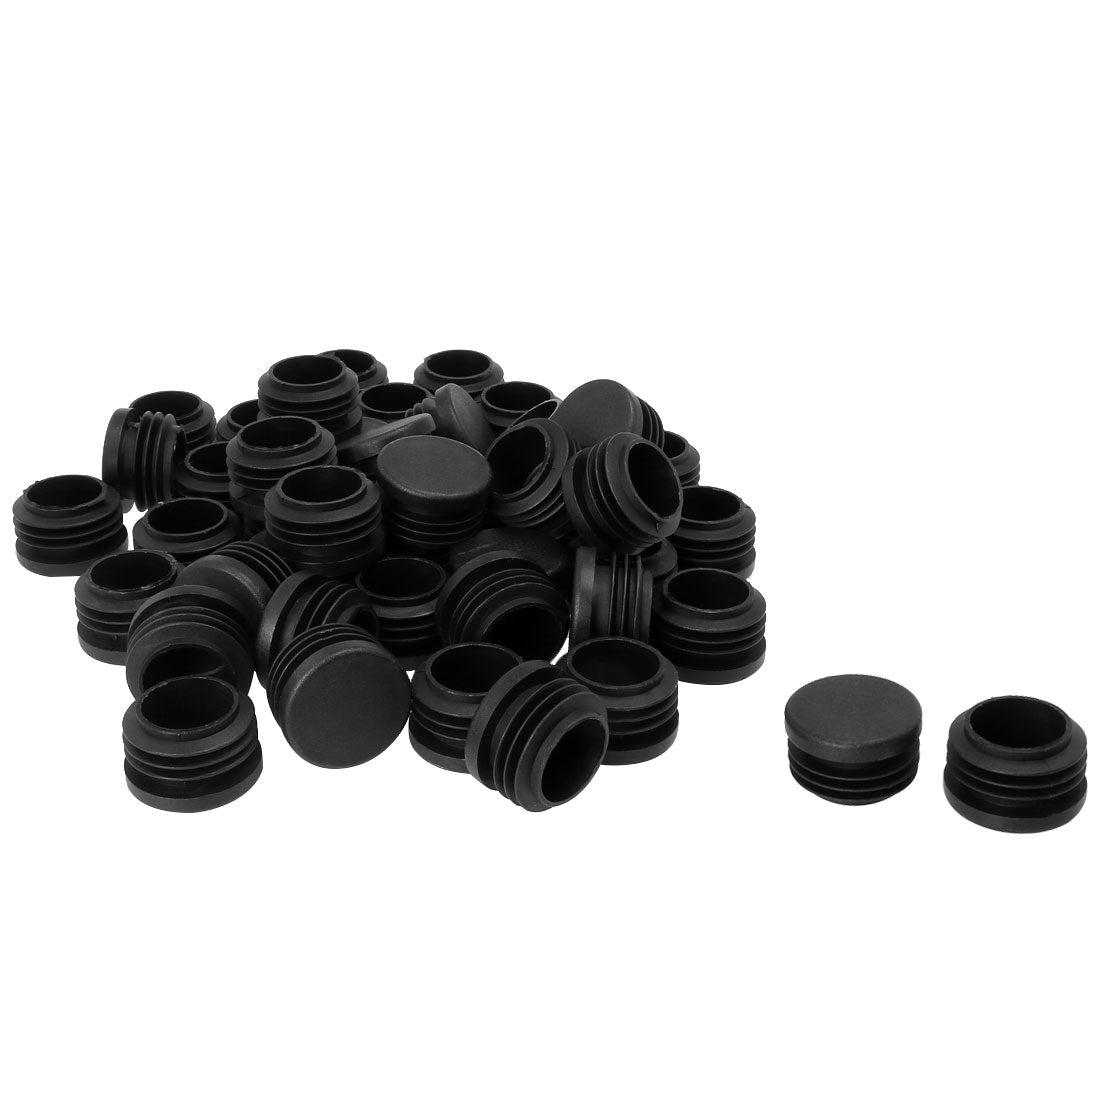 Uxcell Uxcell 1 1/4 " 1.26" OD Plastic Round Tube Insert Glide End Cap Pad 45pcs 1.14"-1.22" Inner Dia for Office Table Feet Reduce Noise